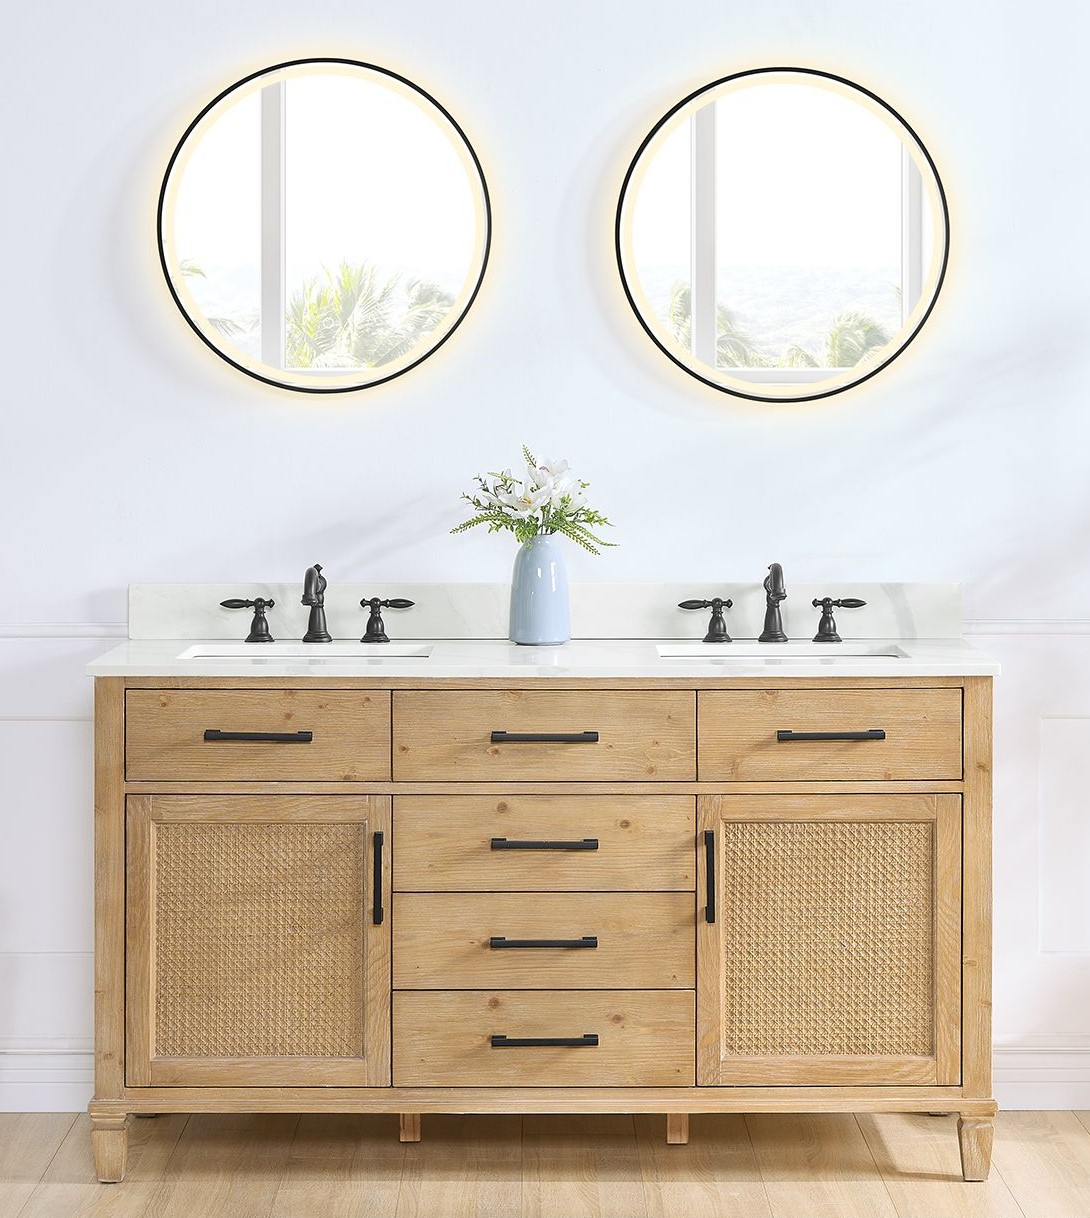 Issac Edwards 60" Double Bathroom Vanity in Weathered Fir with Calacatta White Quartz Stone Countertop with Mirror